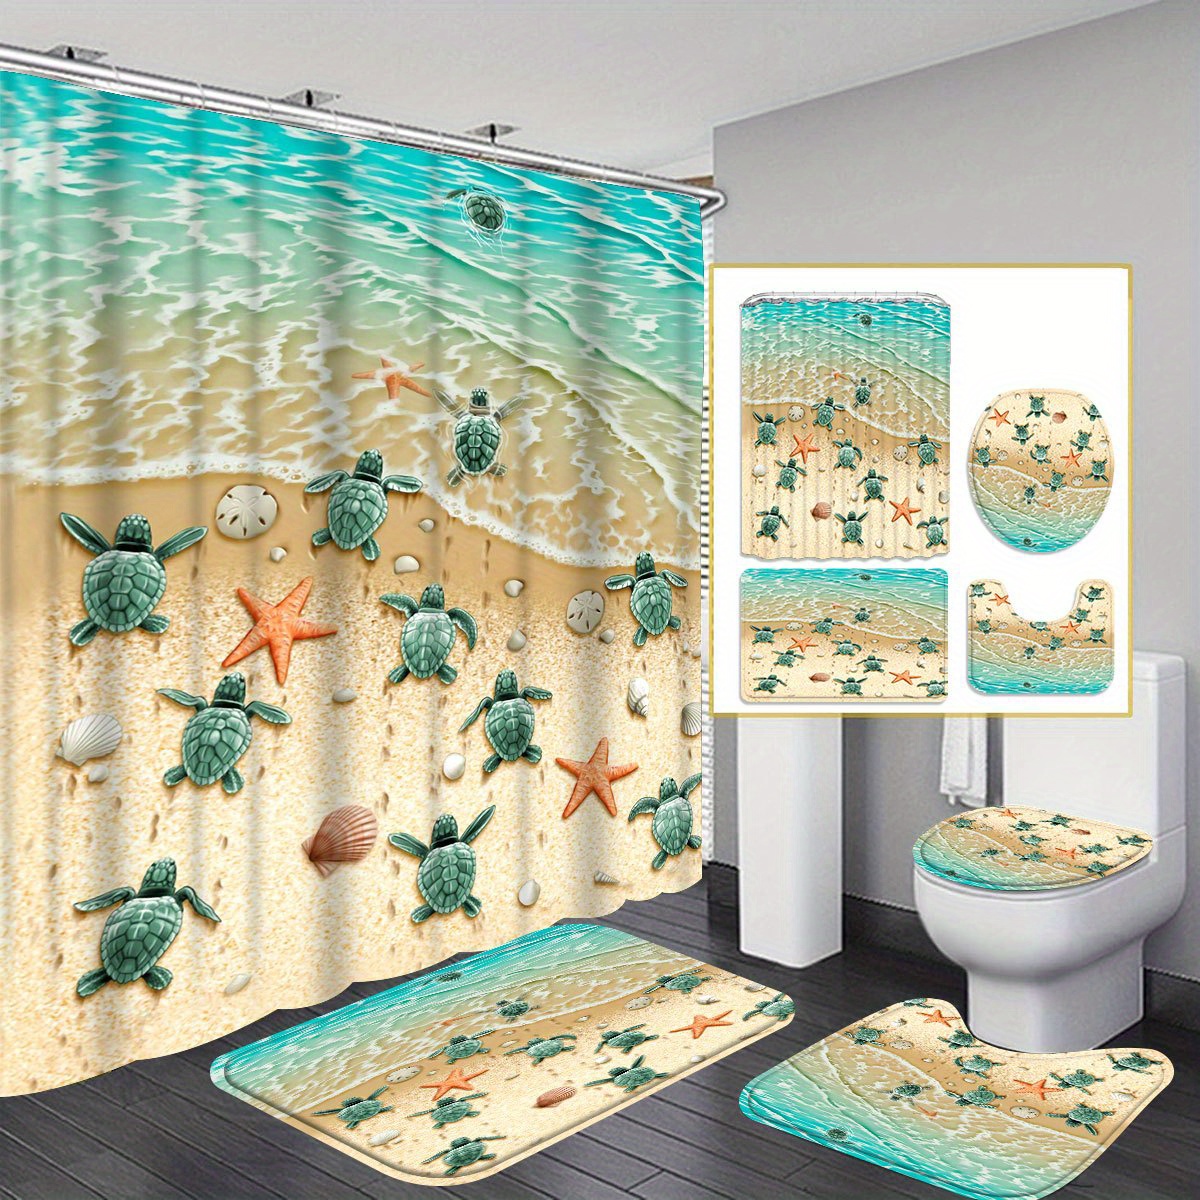 

1pcs/4pcs Sea Turtle Shower Curtain Gift Modern Home Bathroom Decoration Curtain And Toilet Floor Mat 3-piece Set With 12 Shower Curtain Hooks